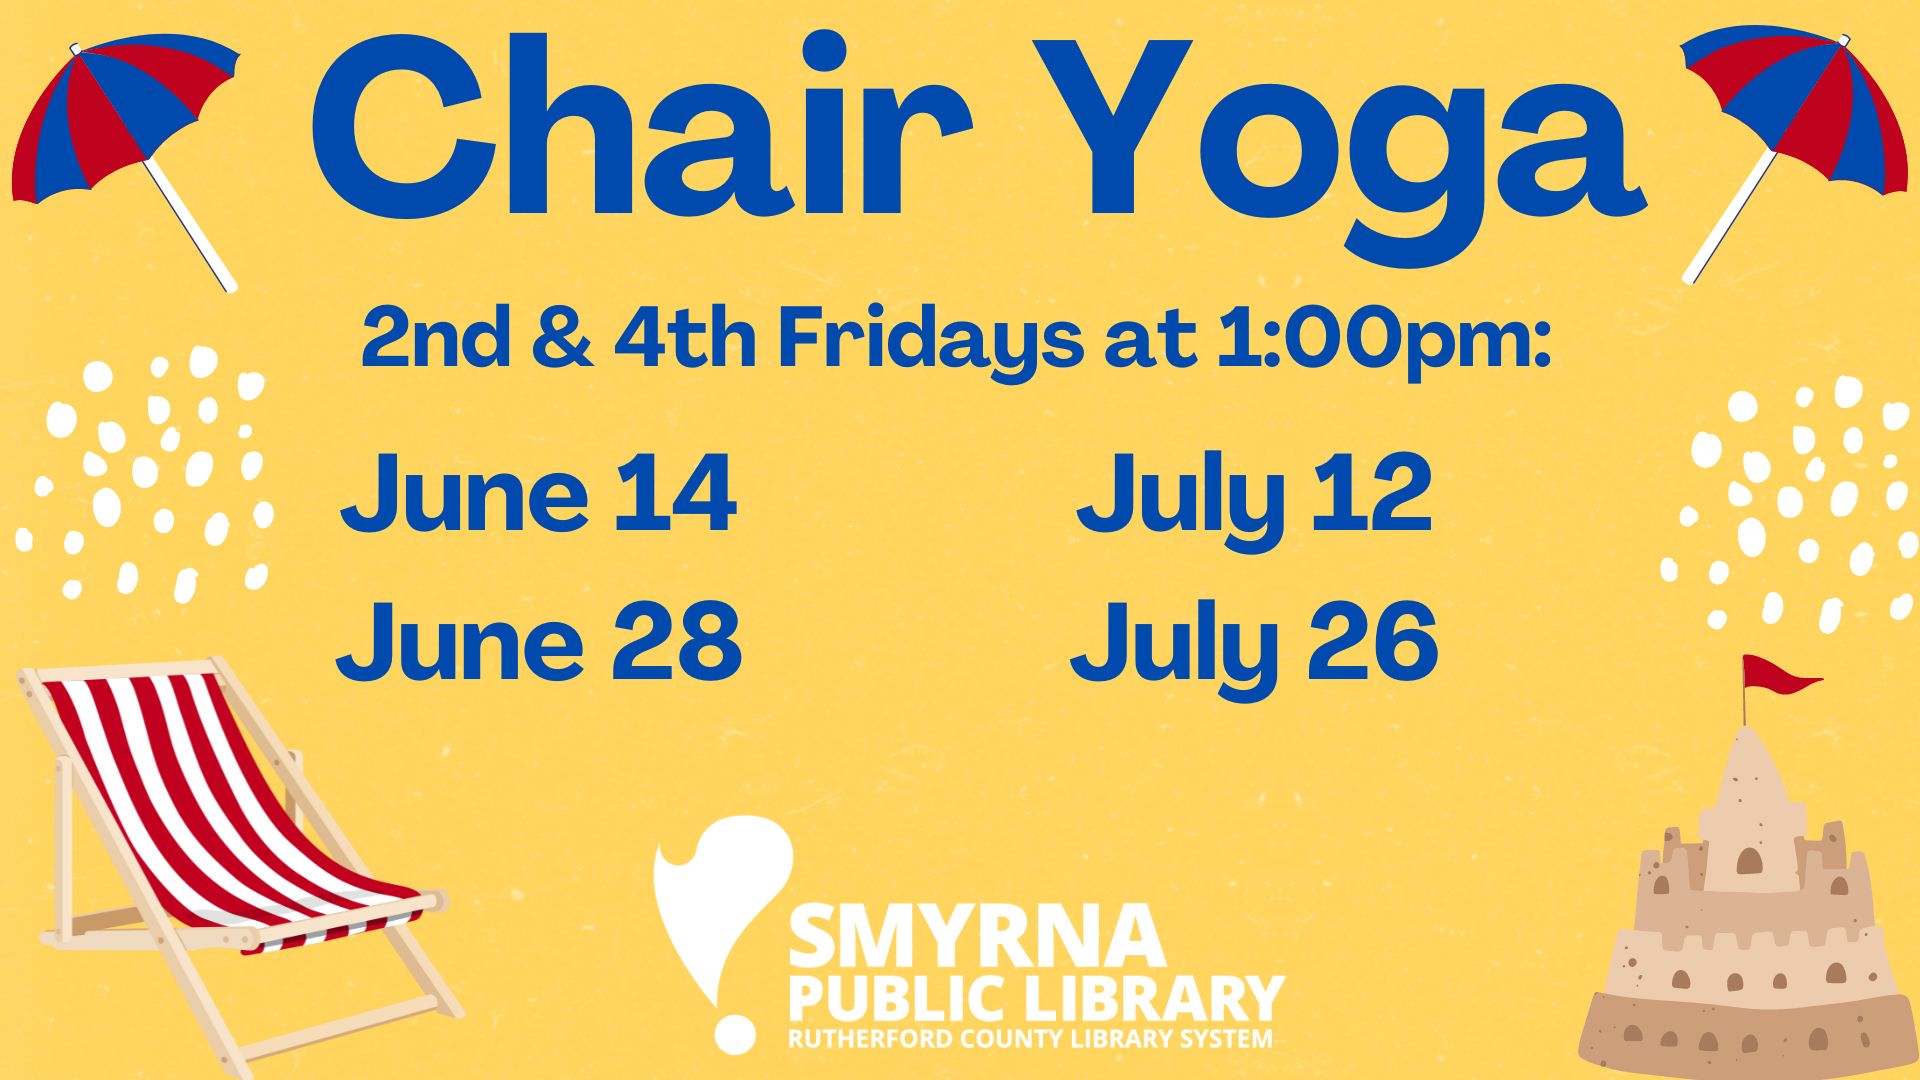 Chair Yoga at Smyrna Public Library, Fridays June 14, June 28, July 12, and July 26 at 1:00pm